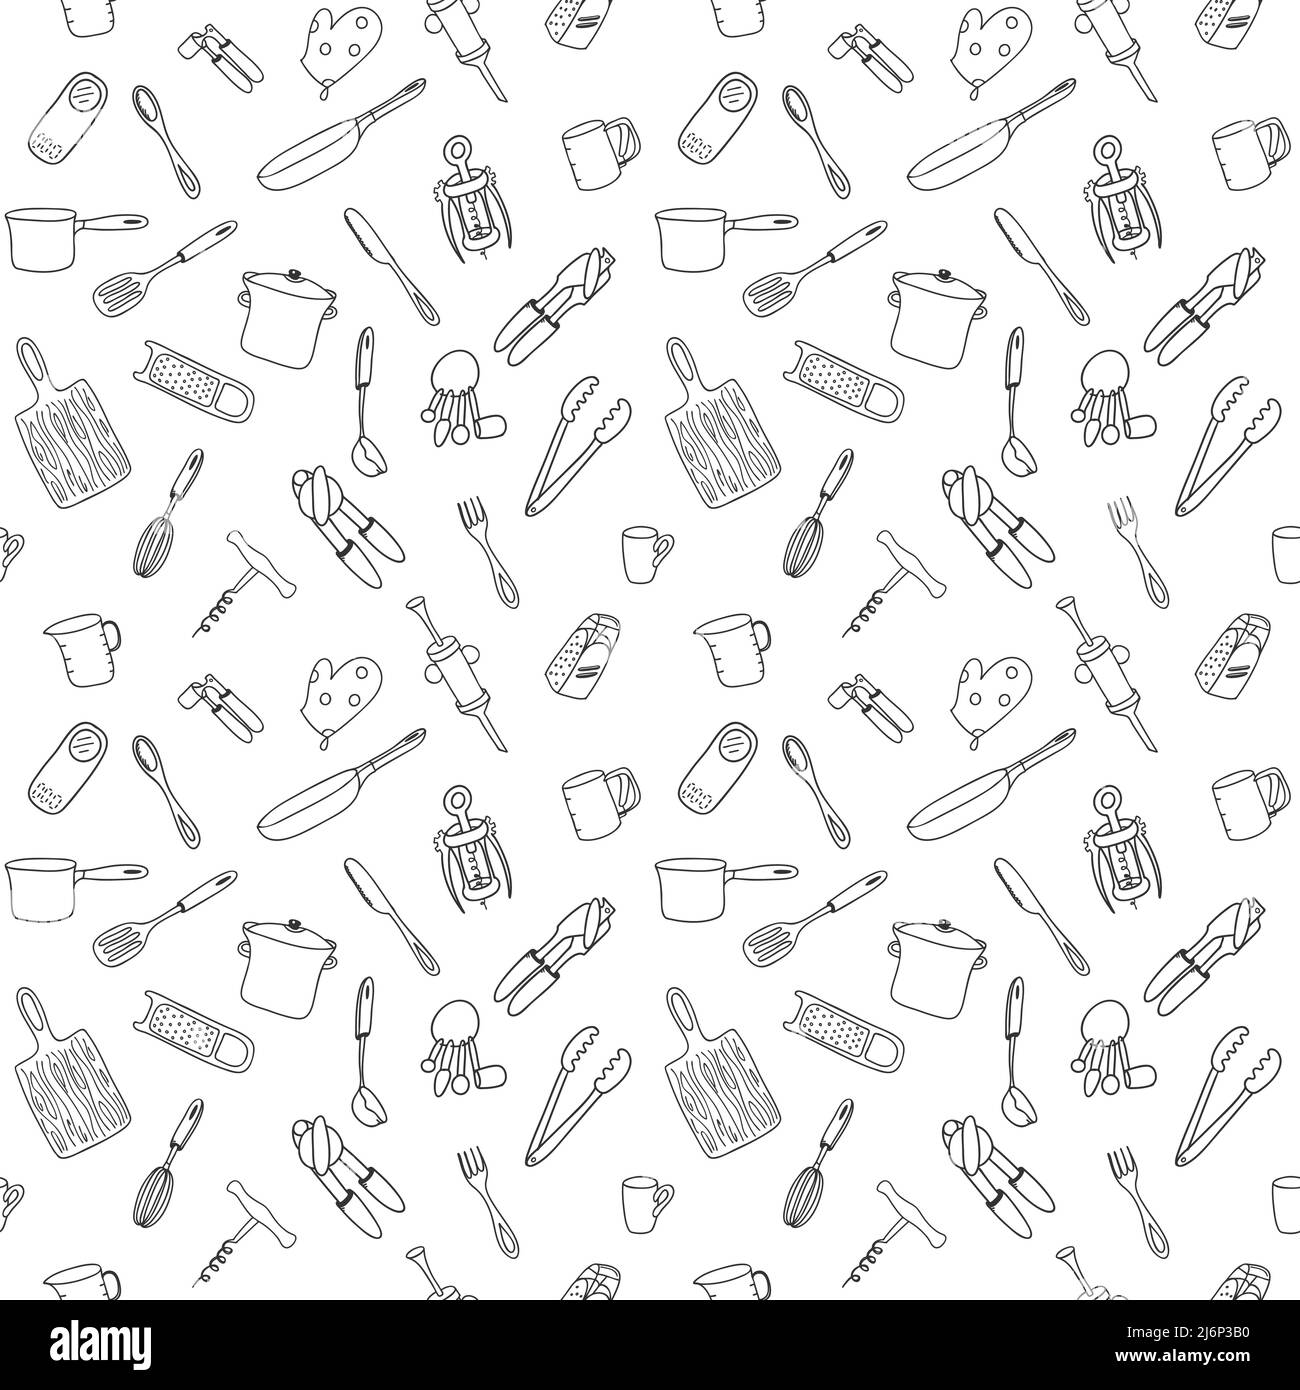 Seamless pattern with elements of kitchen utensils, utensils and appliances. Black-white background for menu design,brochures, web pages. Doodle illus Stock Vector